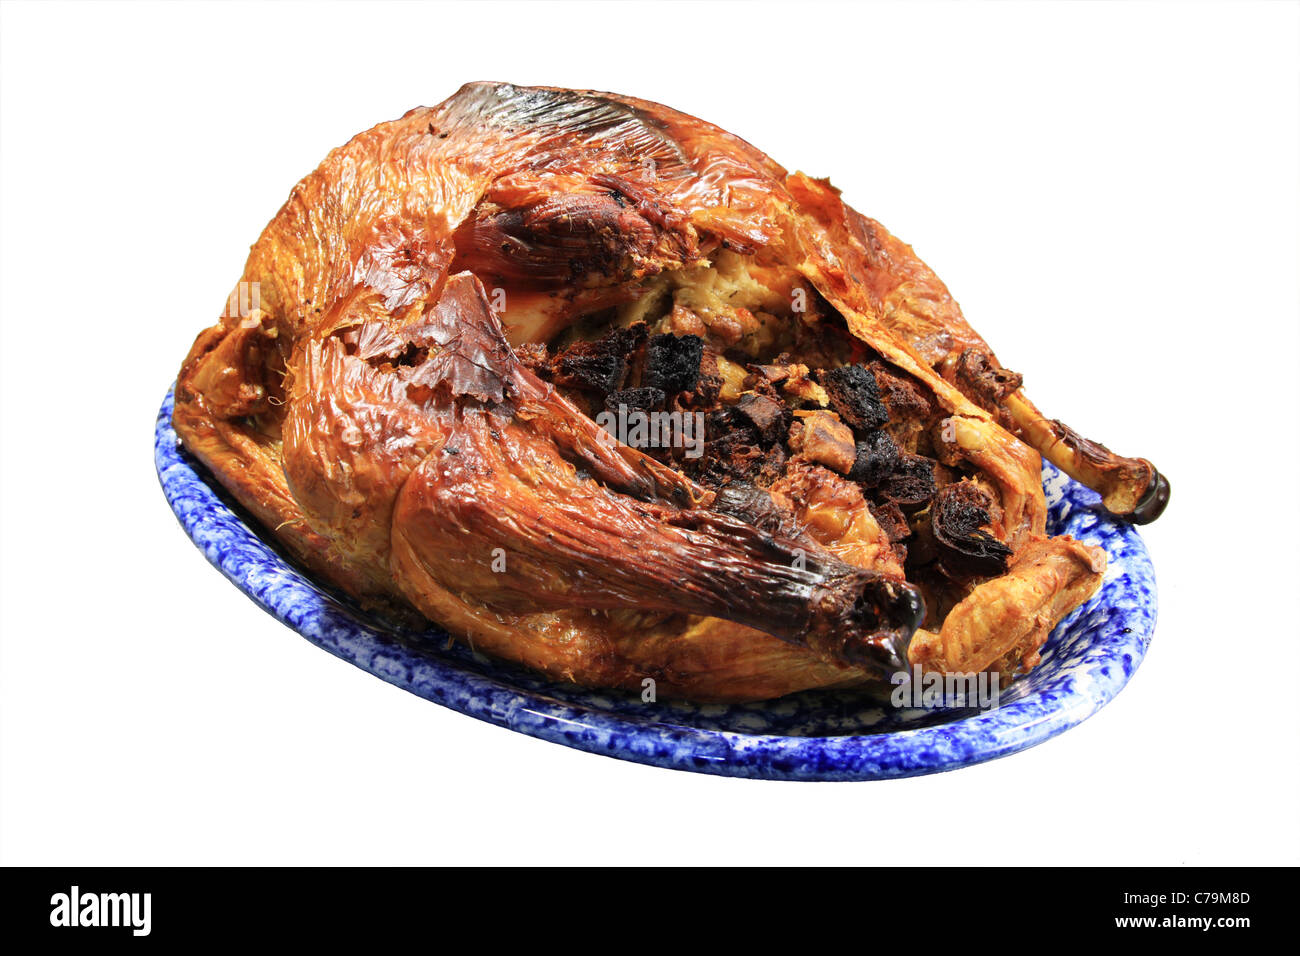 overcooked burned turkey on a blue platter isolated on white Stock Photo